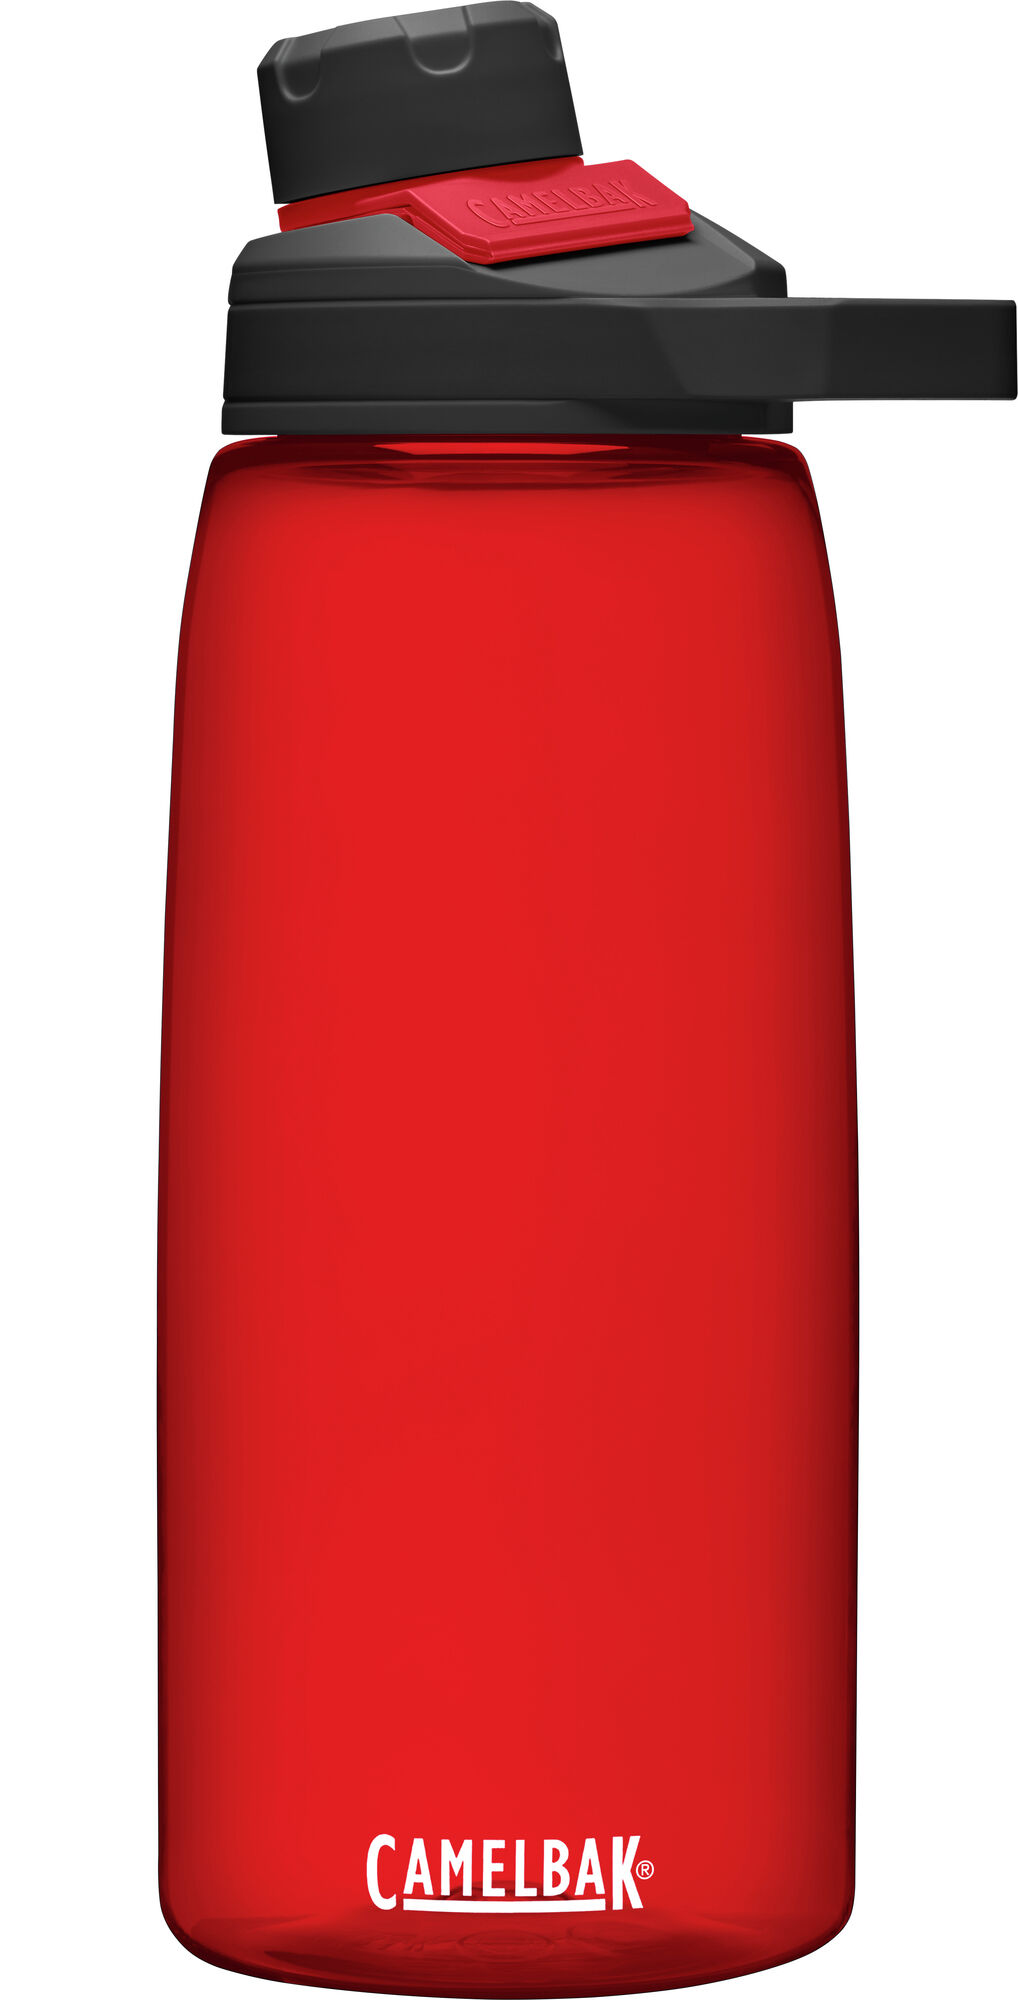 Camelbak Chute Vacuum Thermos 1,2 L Red Stainless Steel Insulated Bottle Brick 